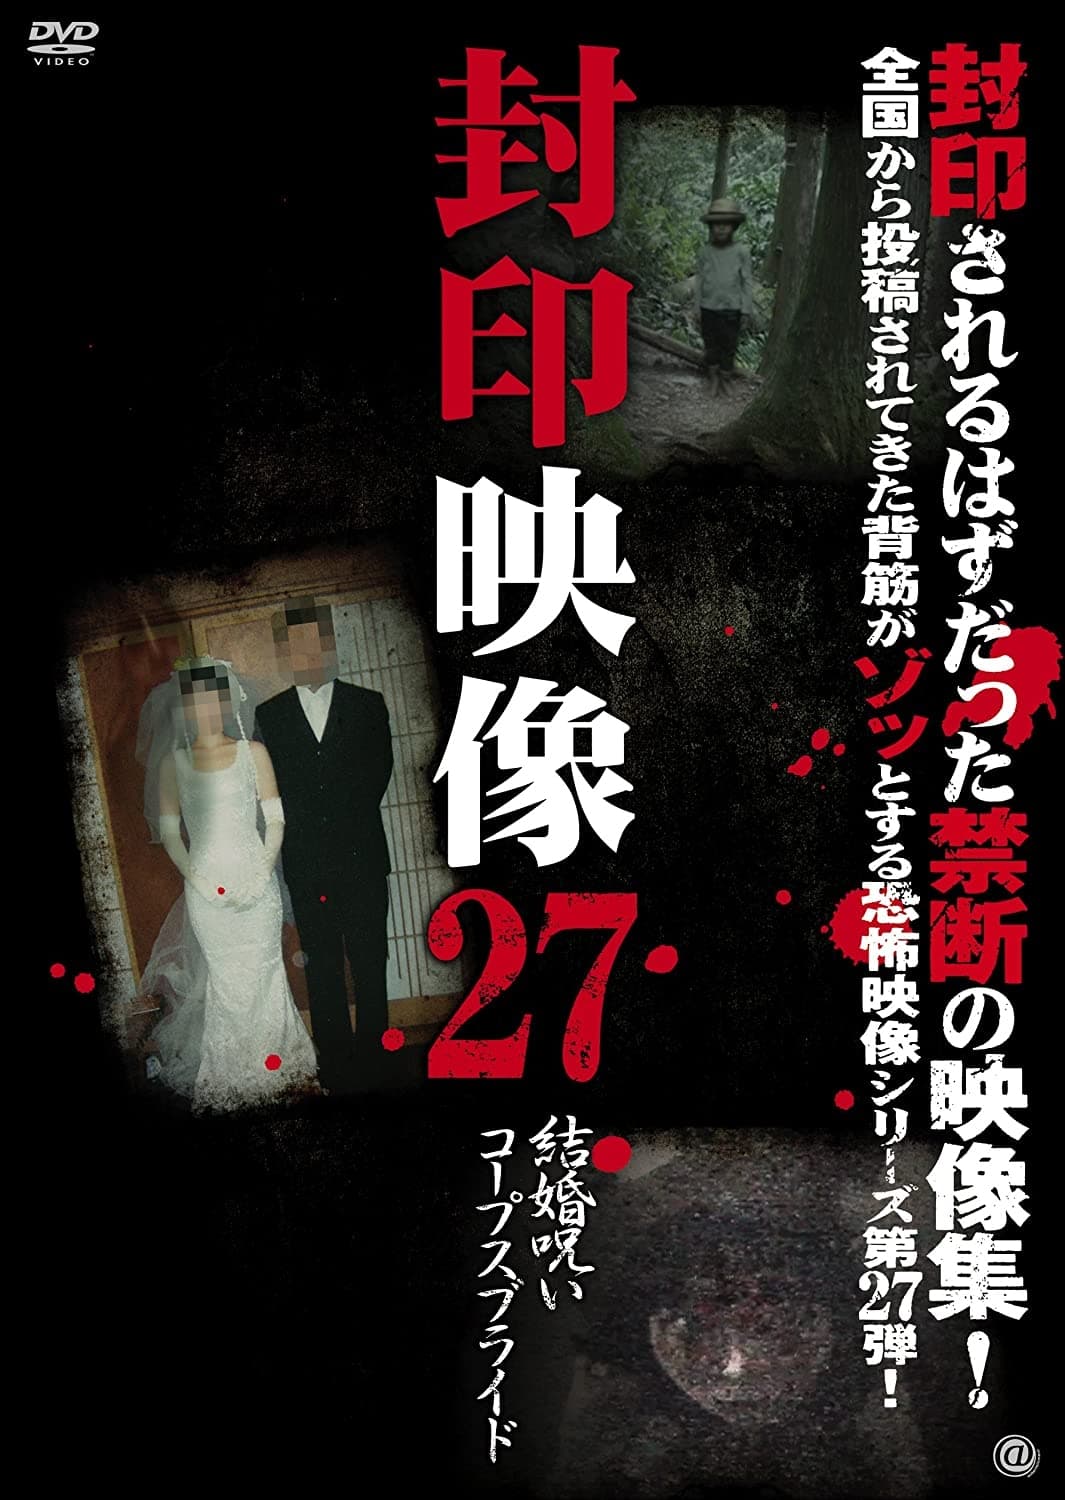 Sealed Video 27: Marriage Curse Corpse Bride